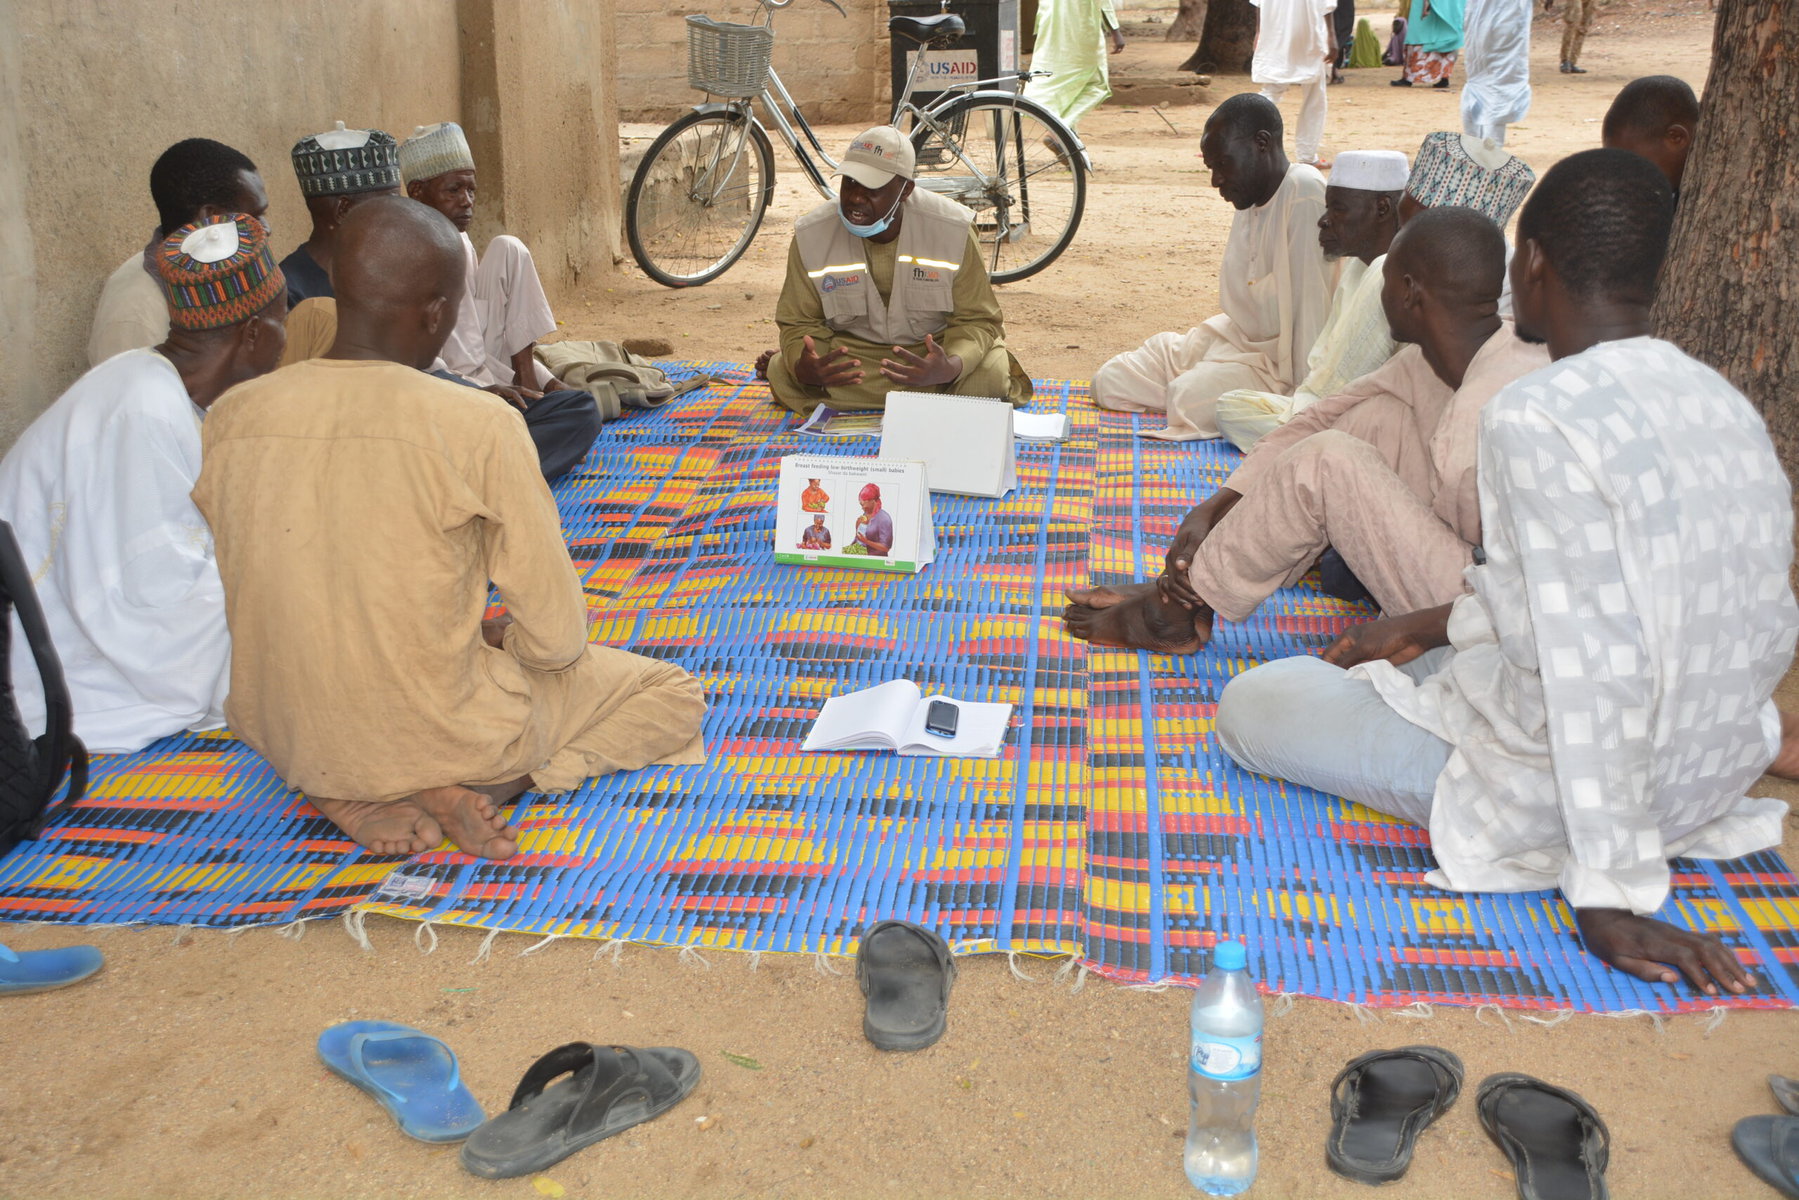 A group of fathers learns about maternal and child care. They sit together on a colorful rug.